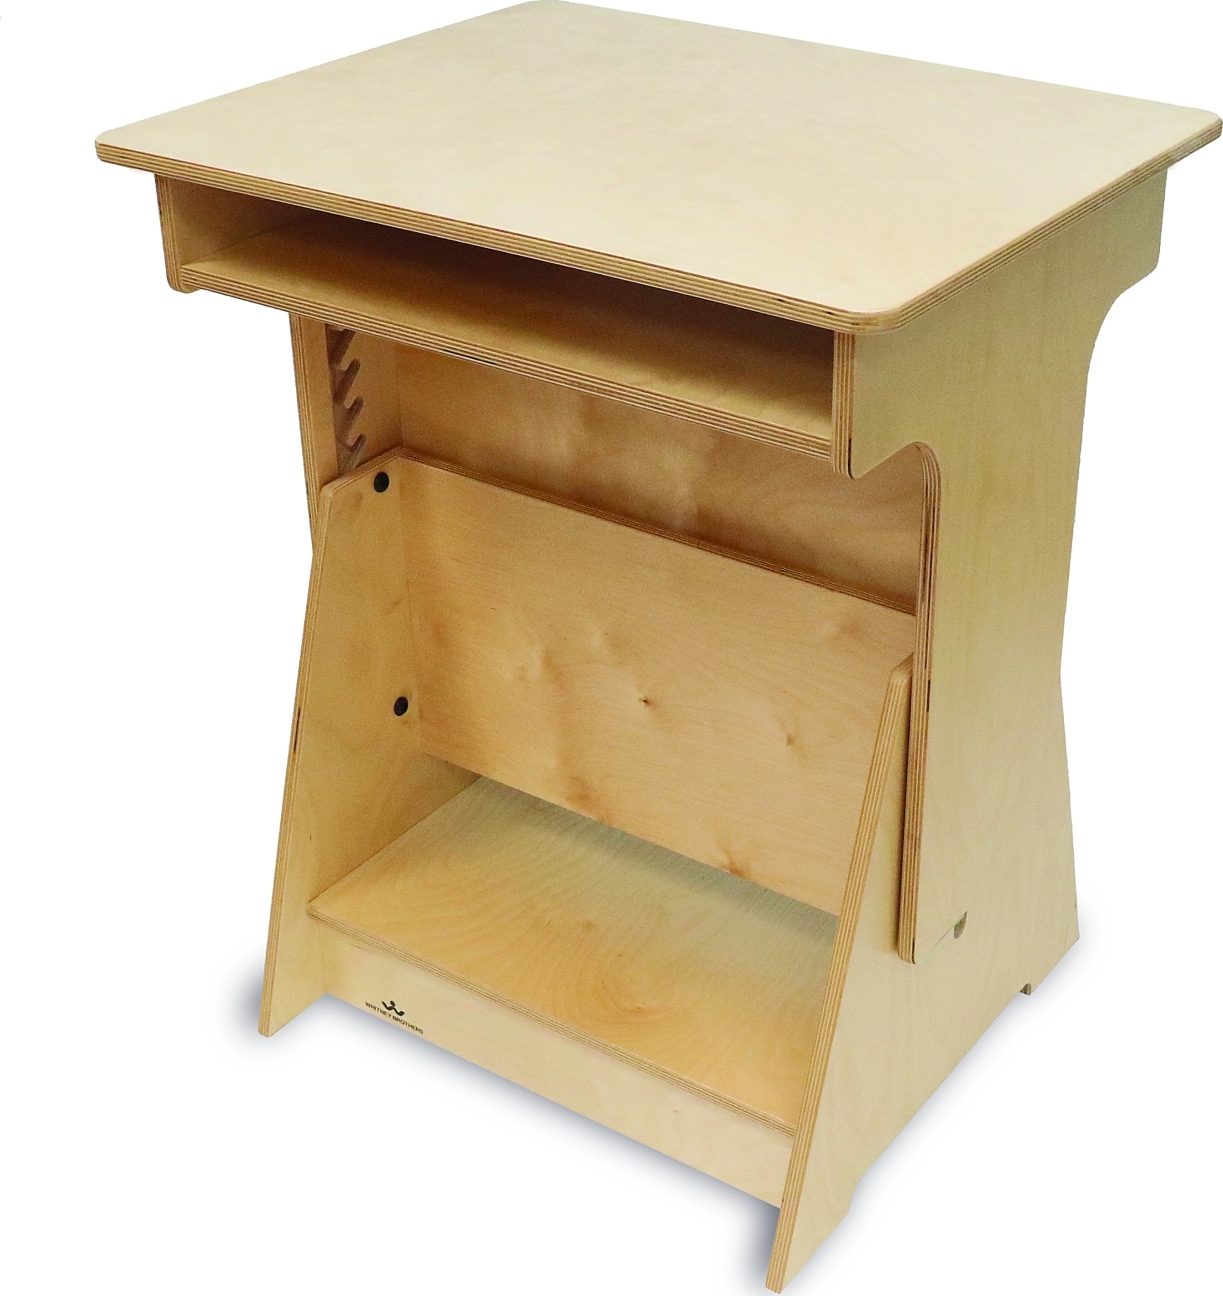 Demo Site Convertible Standing Desk For Early Learners Out Of